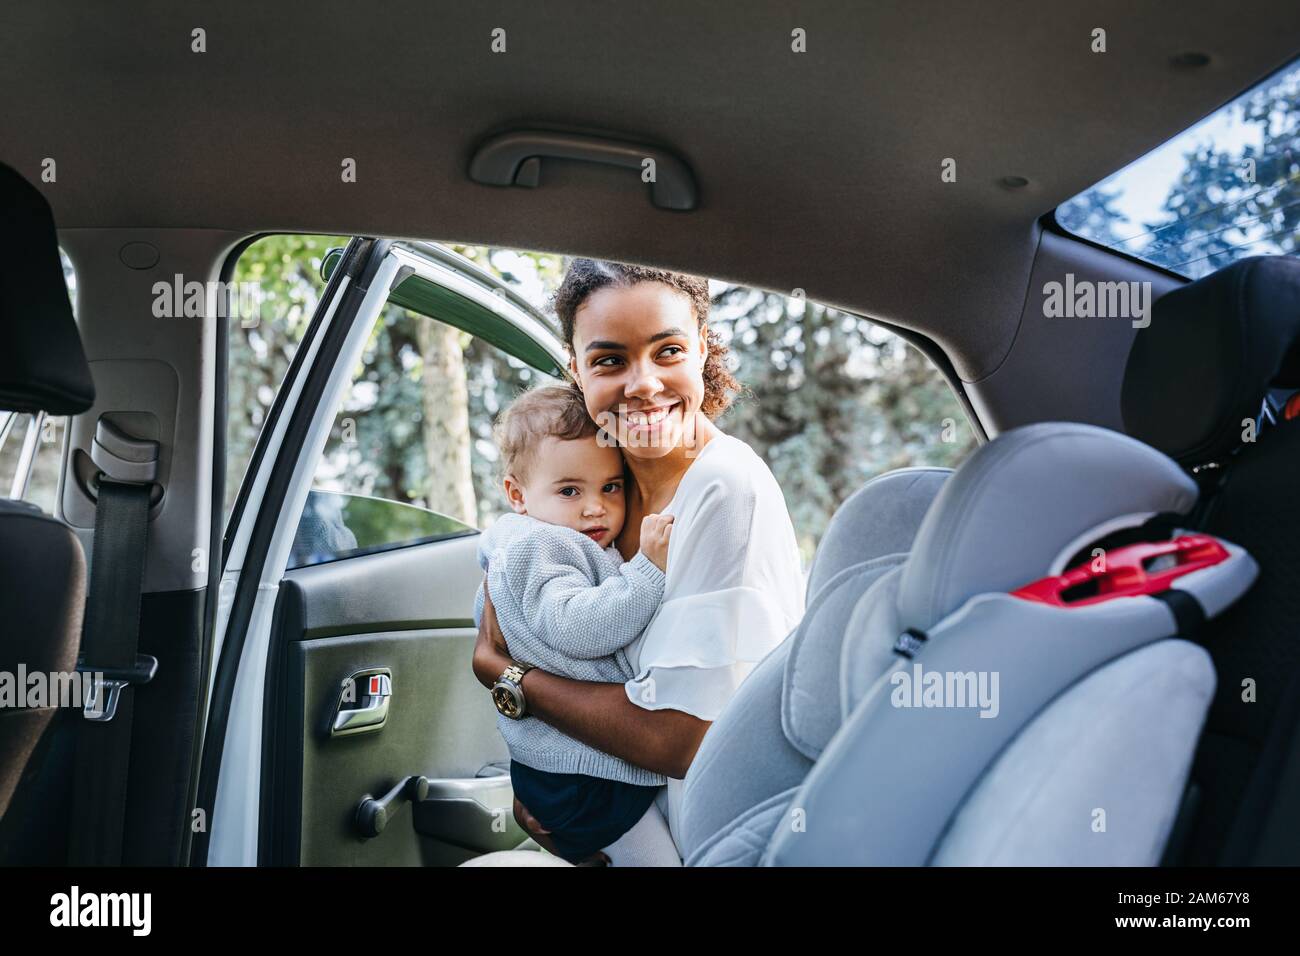 Smiling mother putting baby daughter in a car seat. Young woman holding a child on hands near a car. Stock Photo